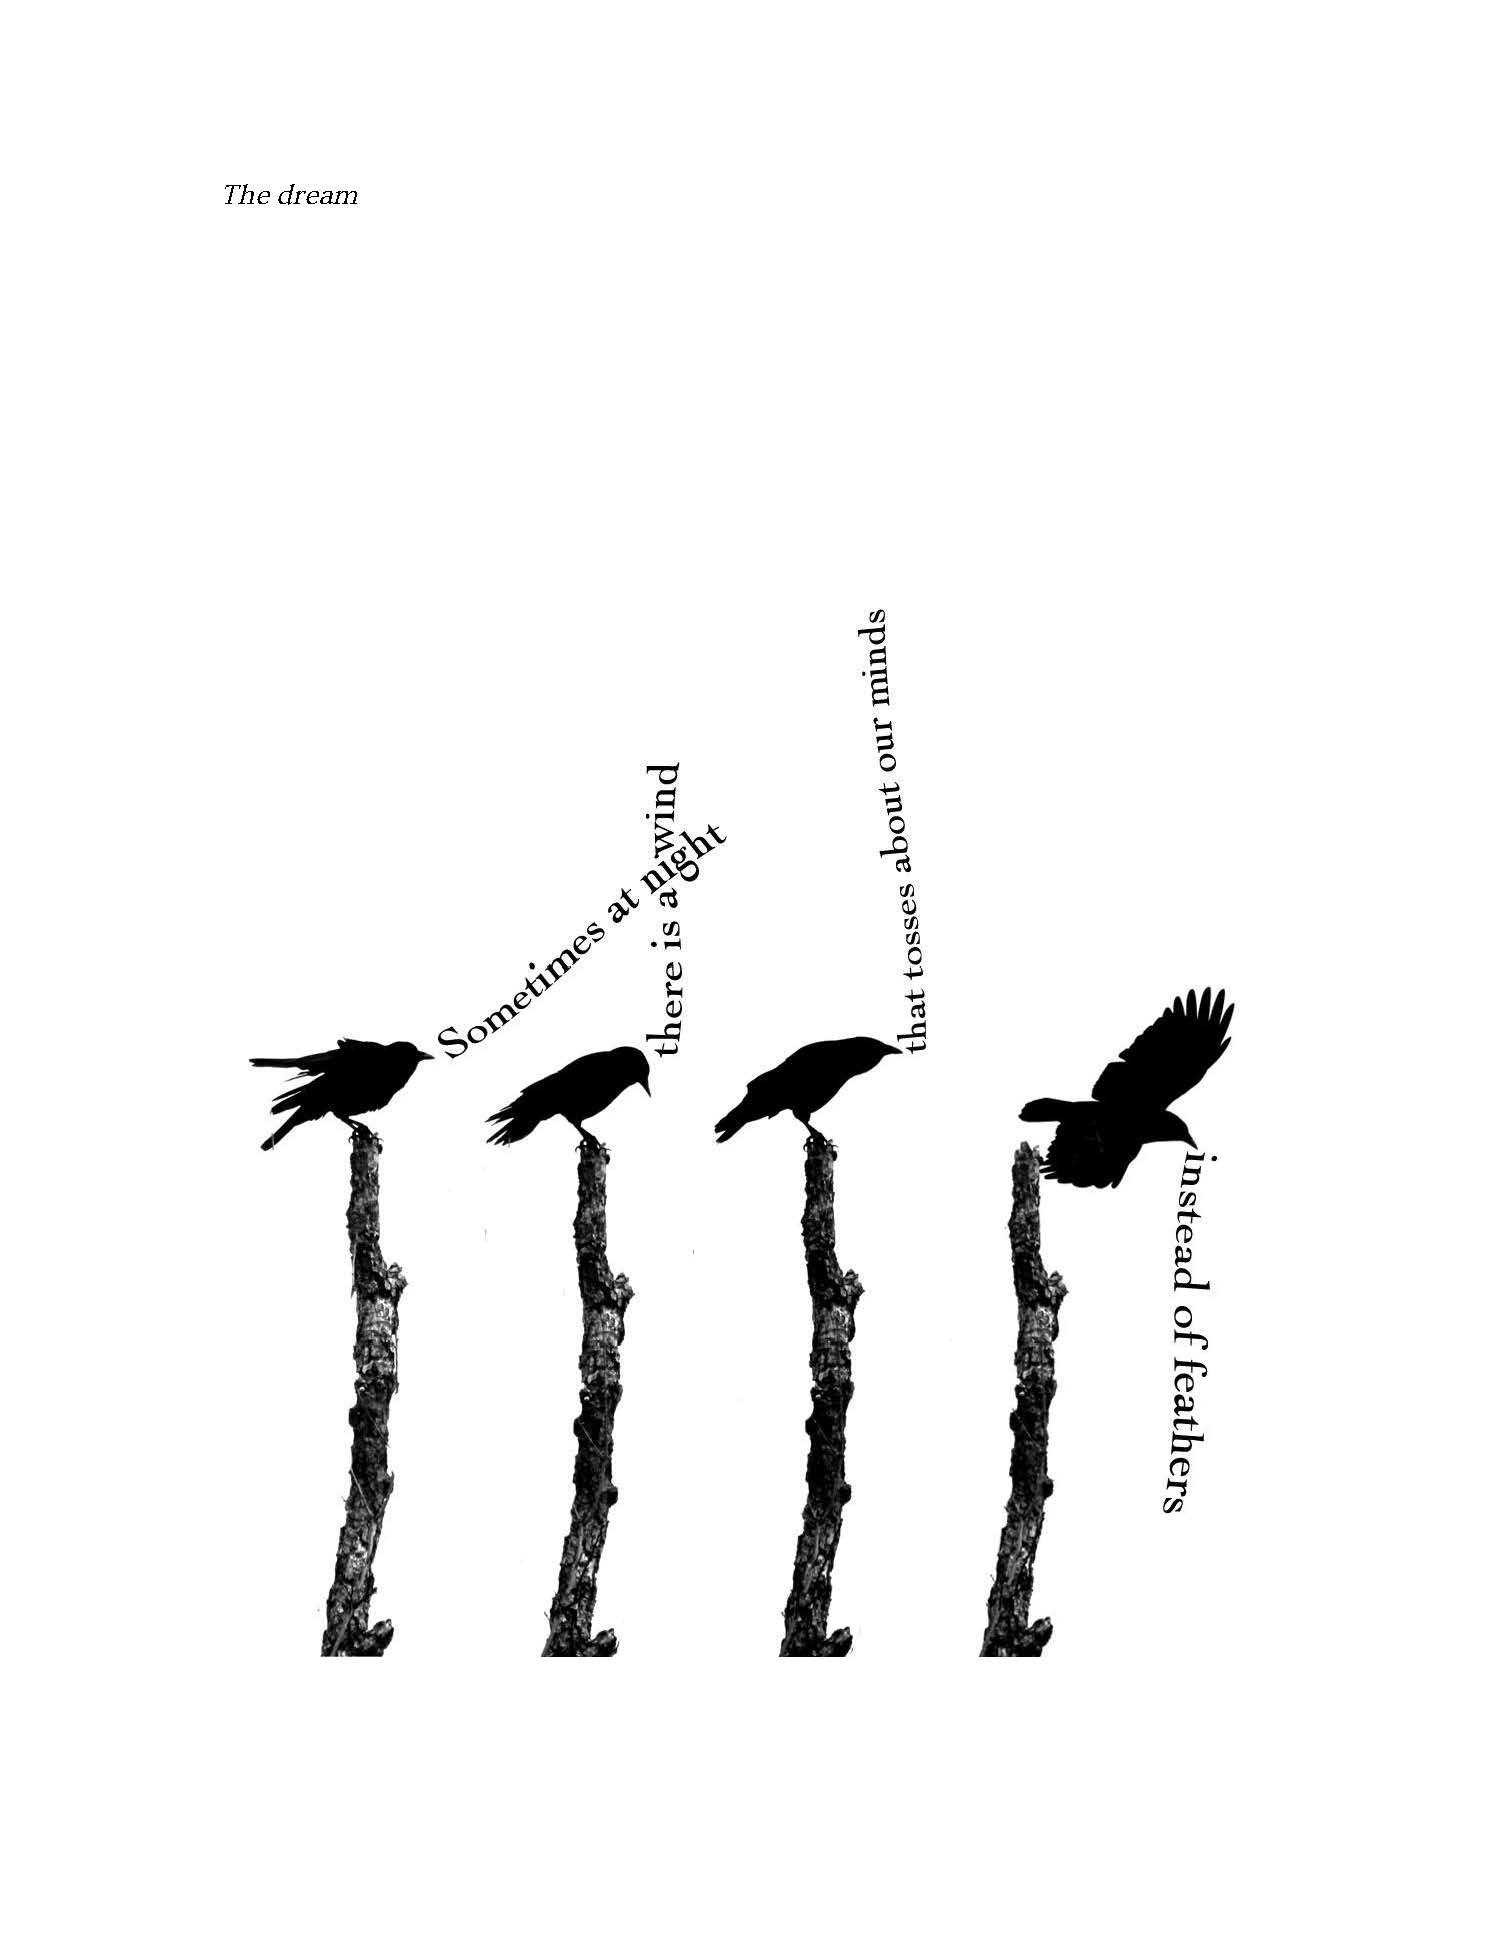 Four birds each on an upright stump with lines of poetry